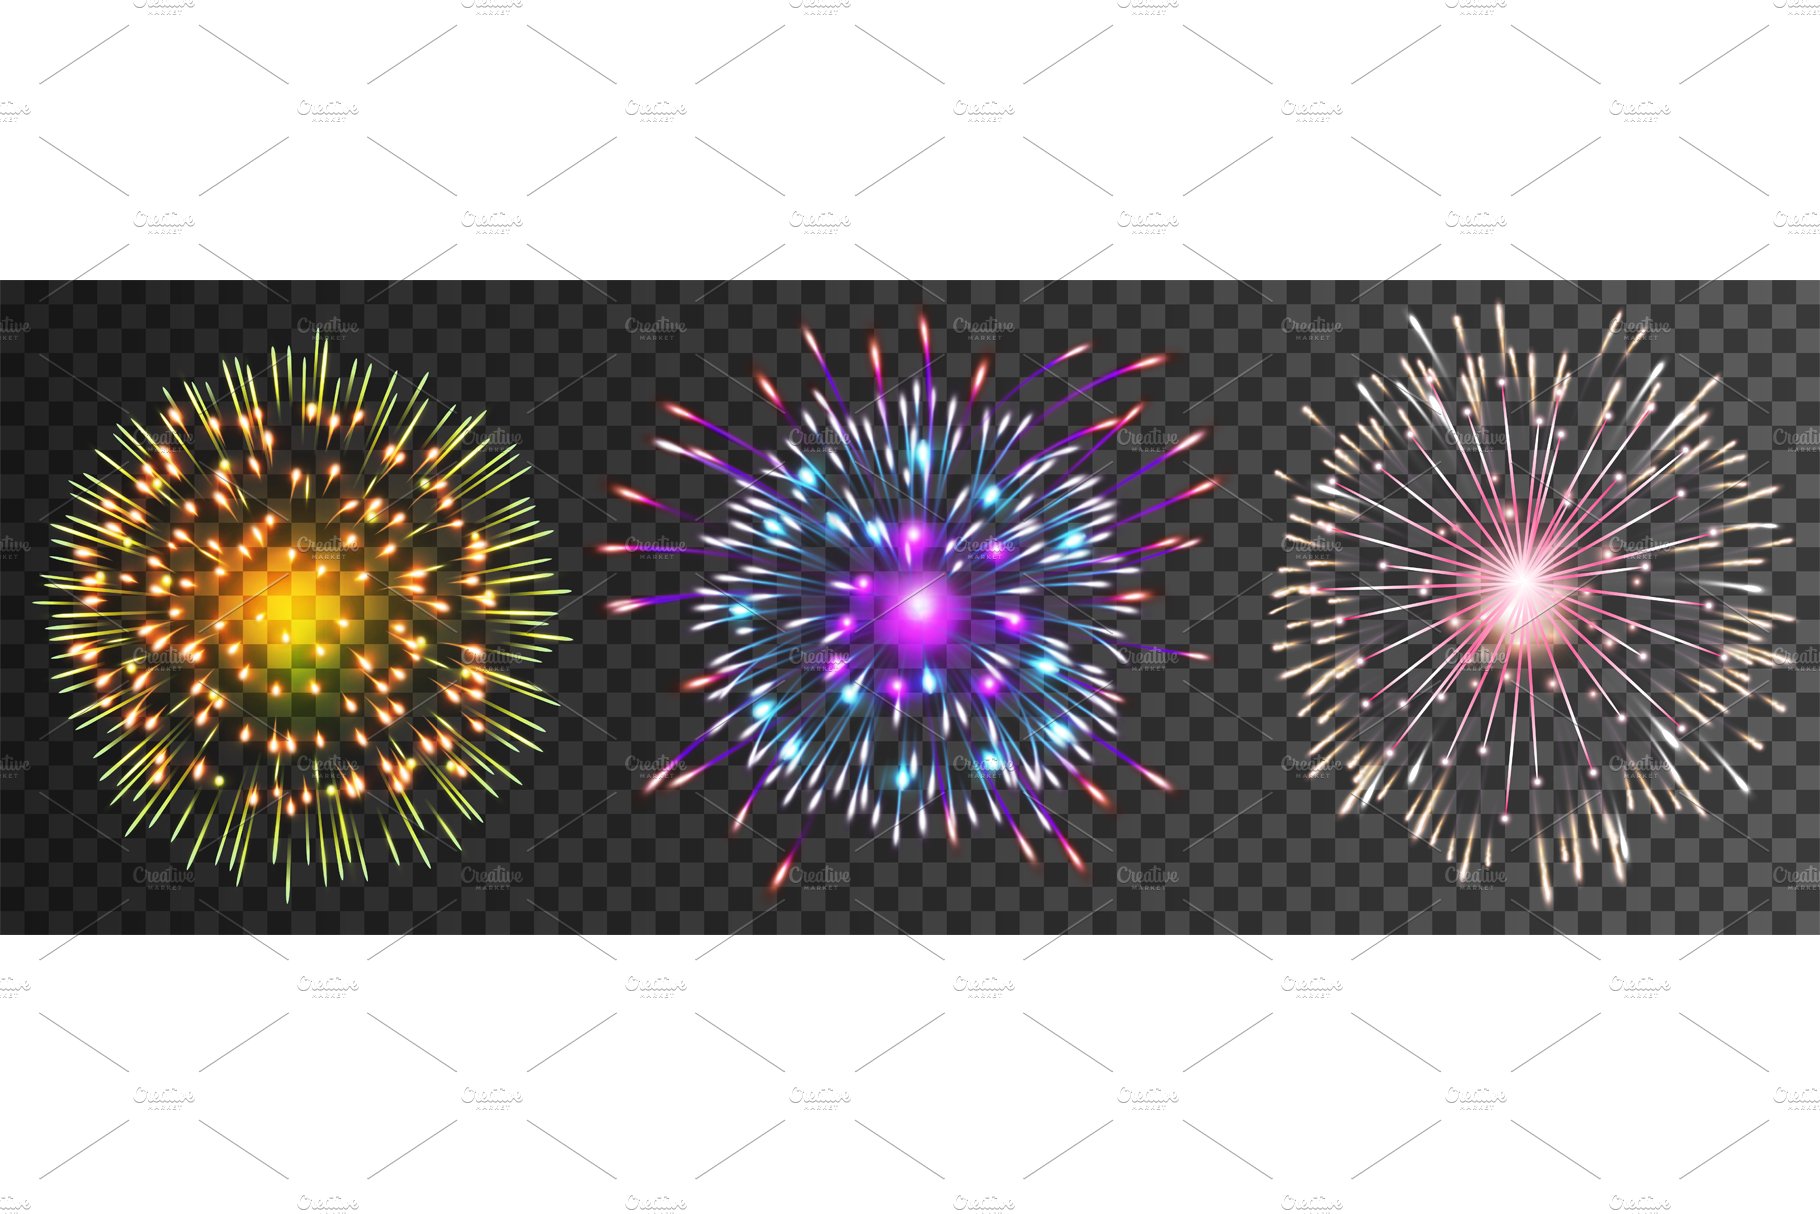 Set of isolated vector fireworks cover image.